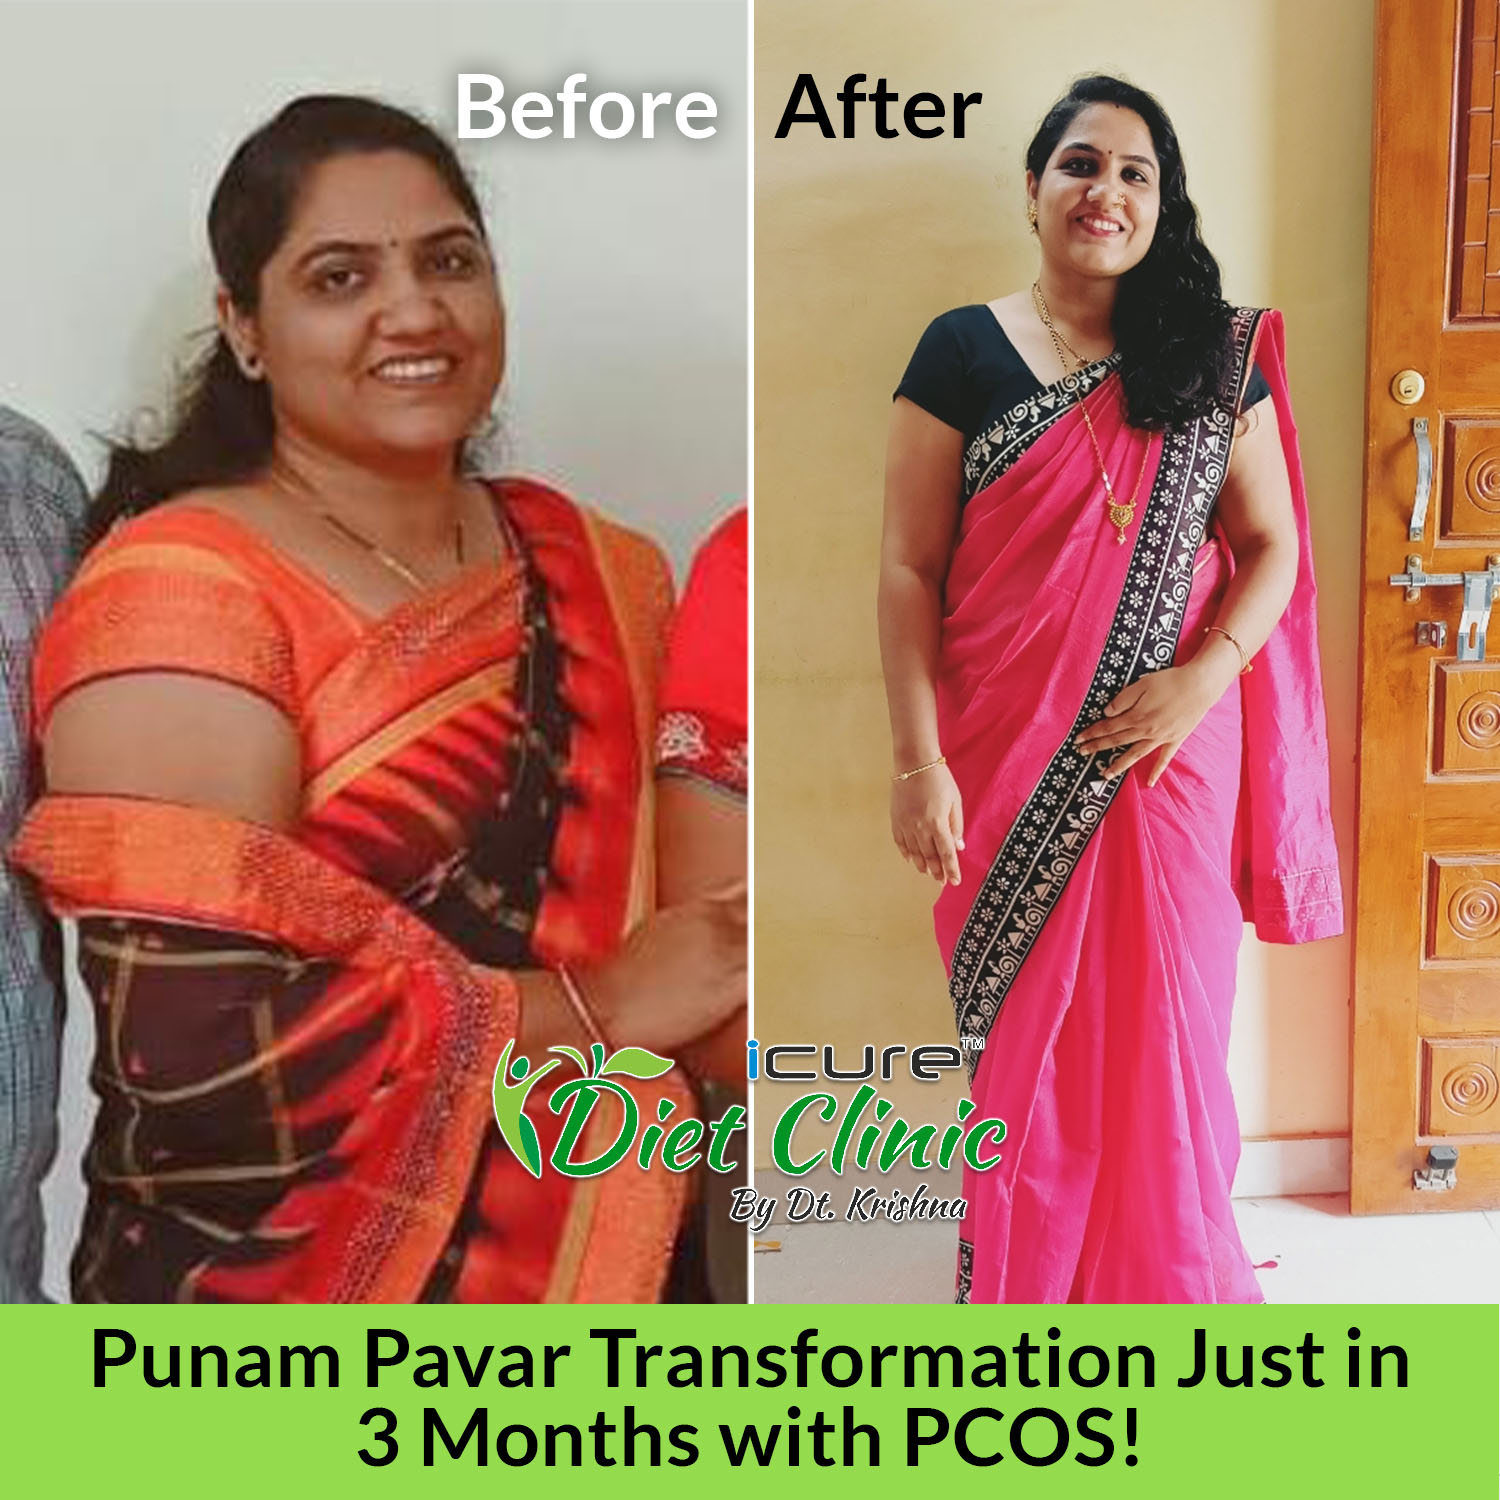 Punam Pavar transformation just in 3 months with PCOS!